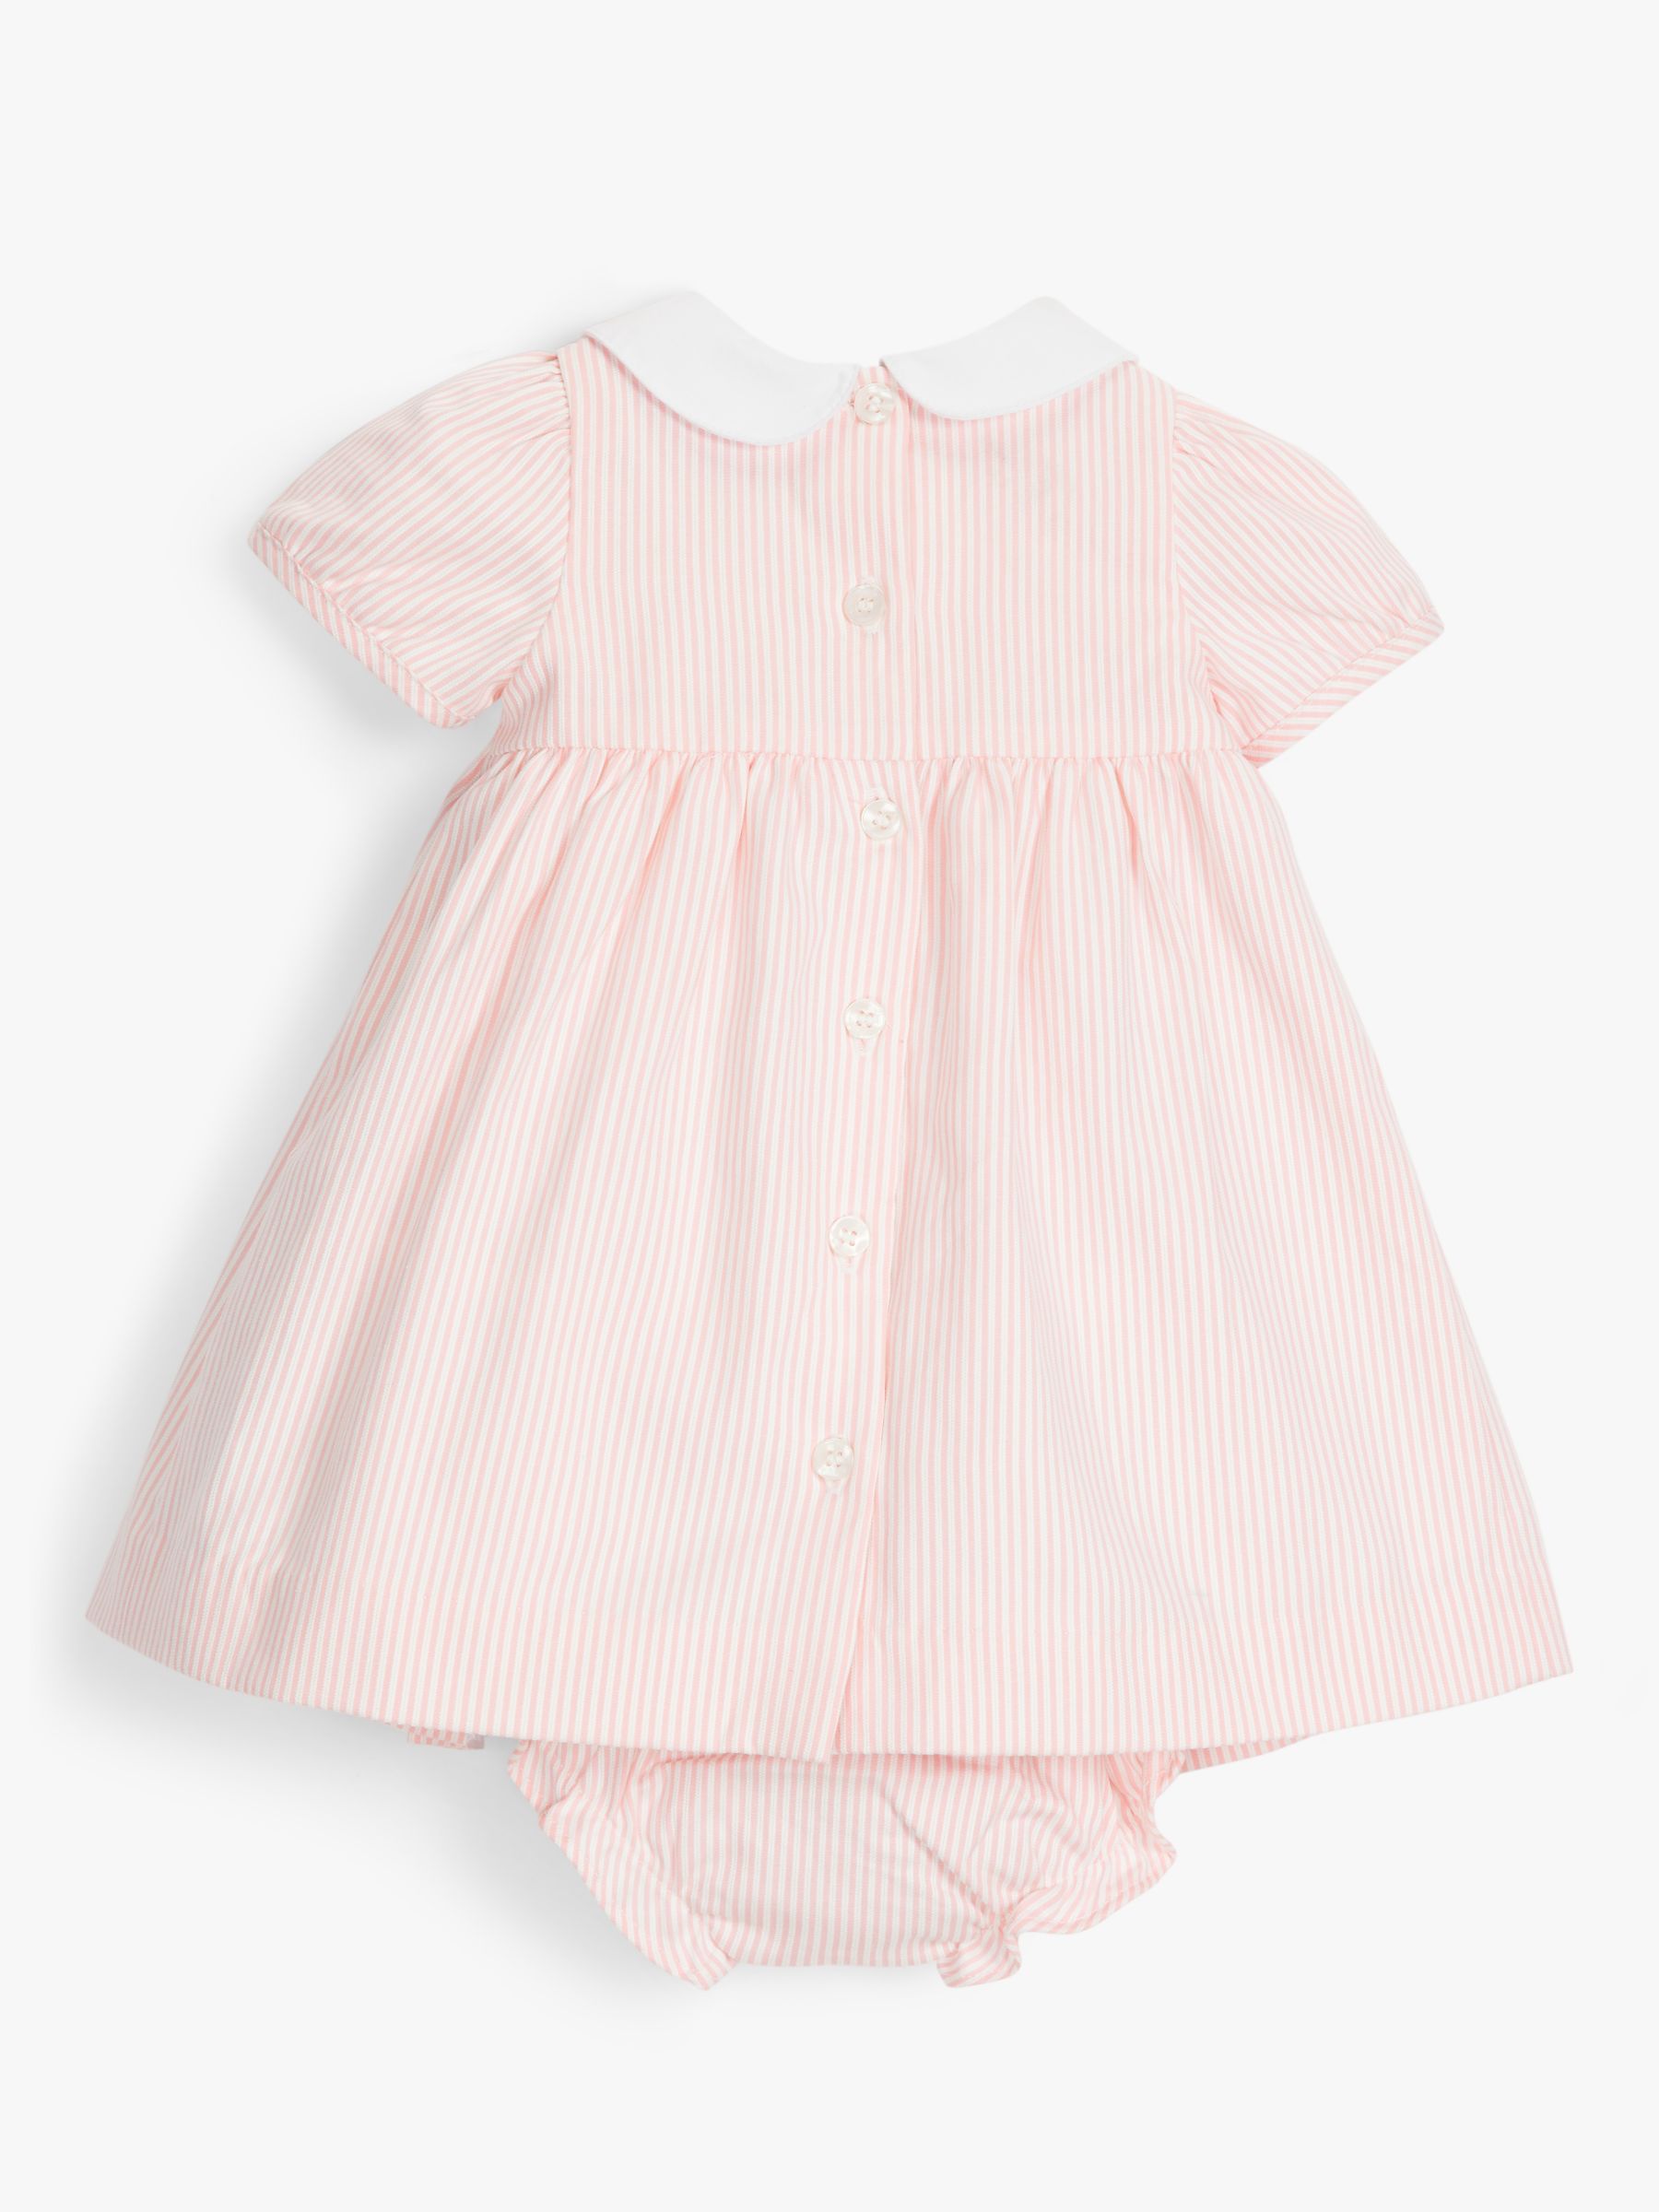 John Lewis Heirloom Collection Baby Stripe Dress and Knicker Set, Pink, 0-3 months